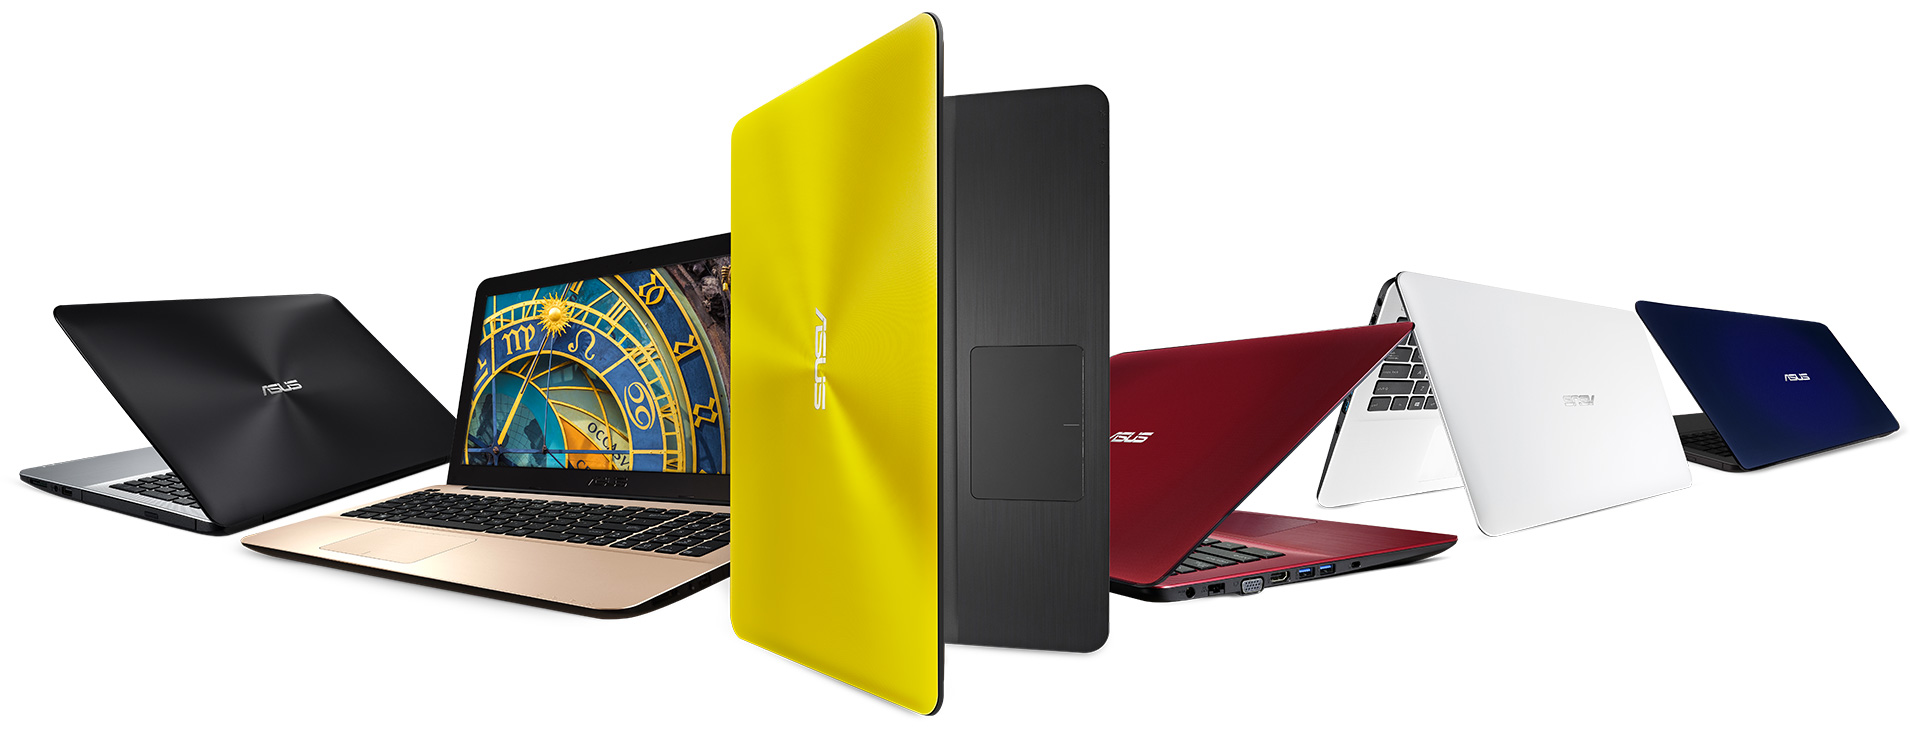 X555LD | Notebooks | ASUS Global